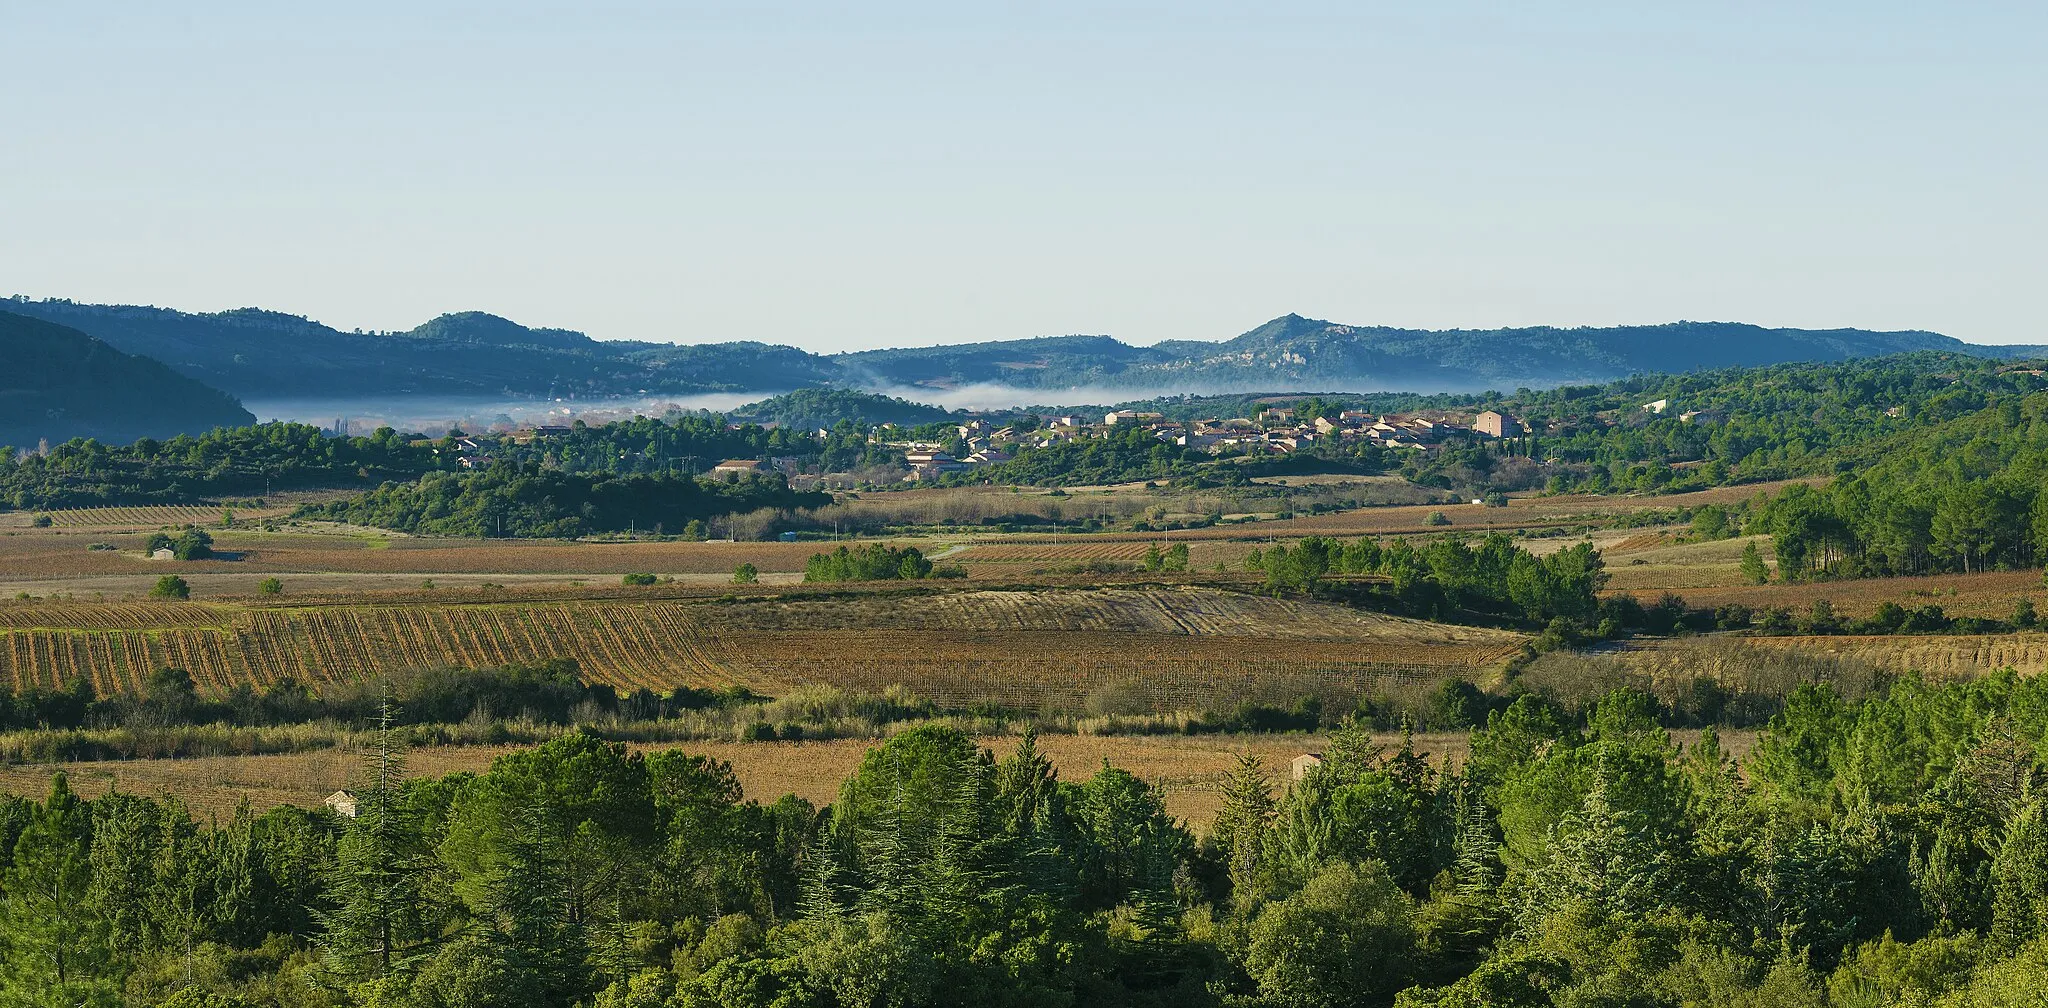 Photo showing: The village and the Southeastern part of the communal area seen from Northeast. Prades-sur-Vernazobre, Hérault, France. These vines are among those which produce the French wine Saint-Chinian.